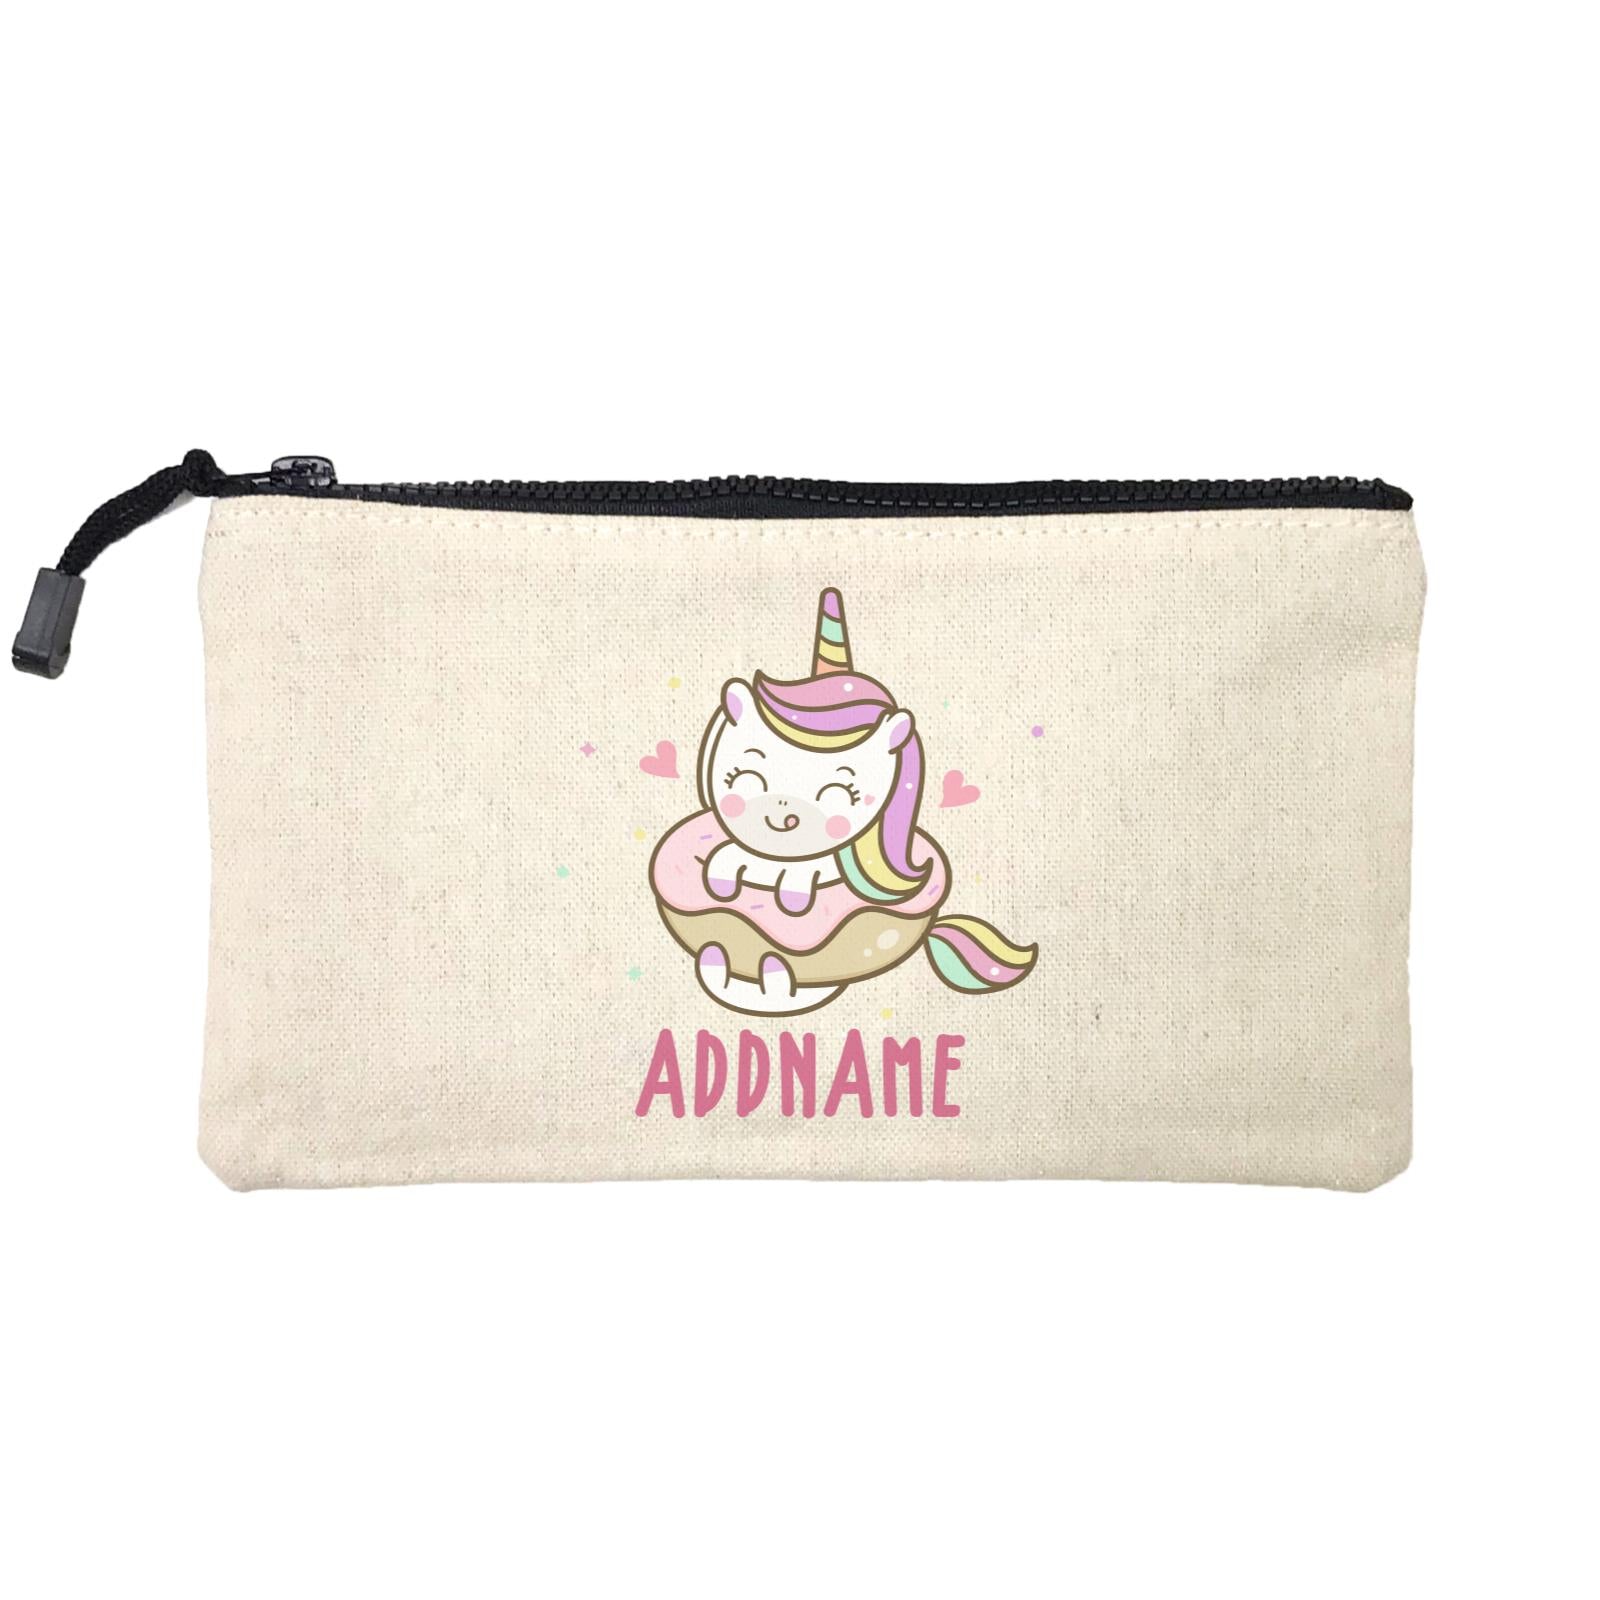 Unicorn And Princess Series Unicorn Eating Donut Addname Mini Accessories Stationery Pouch